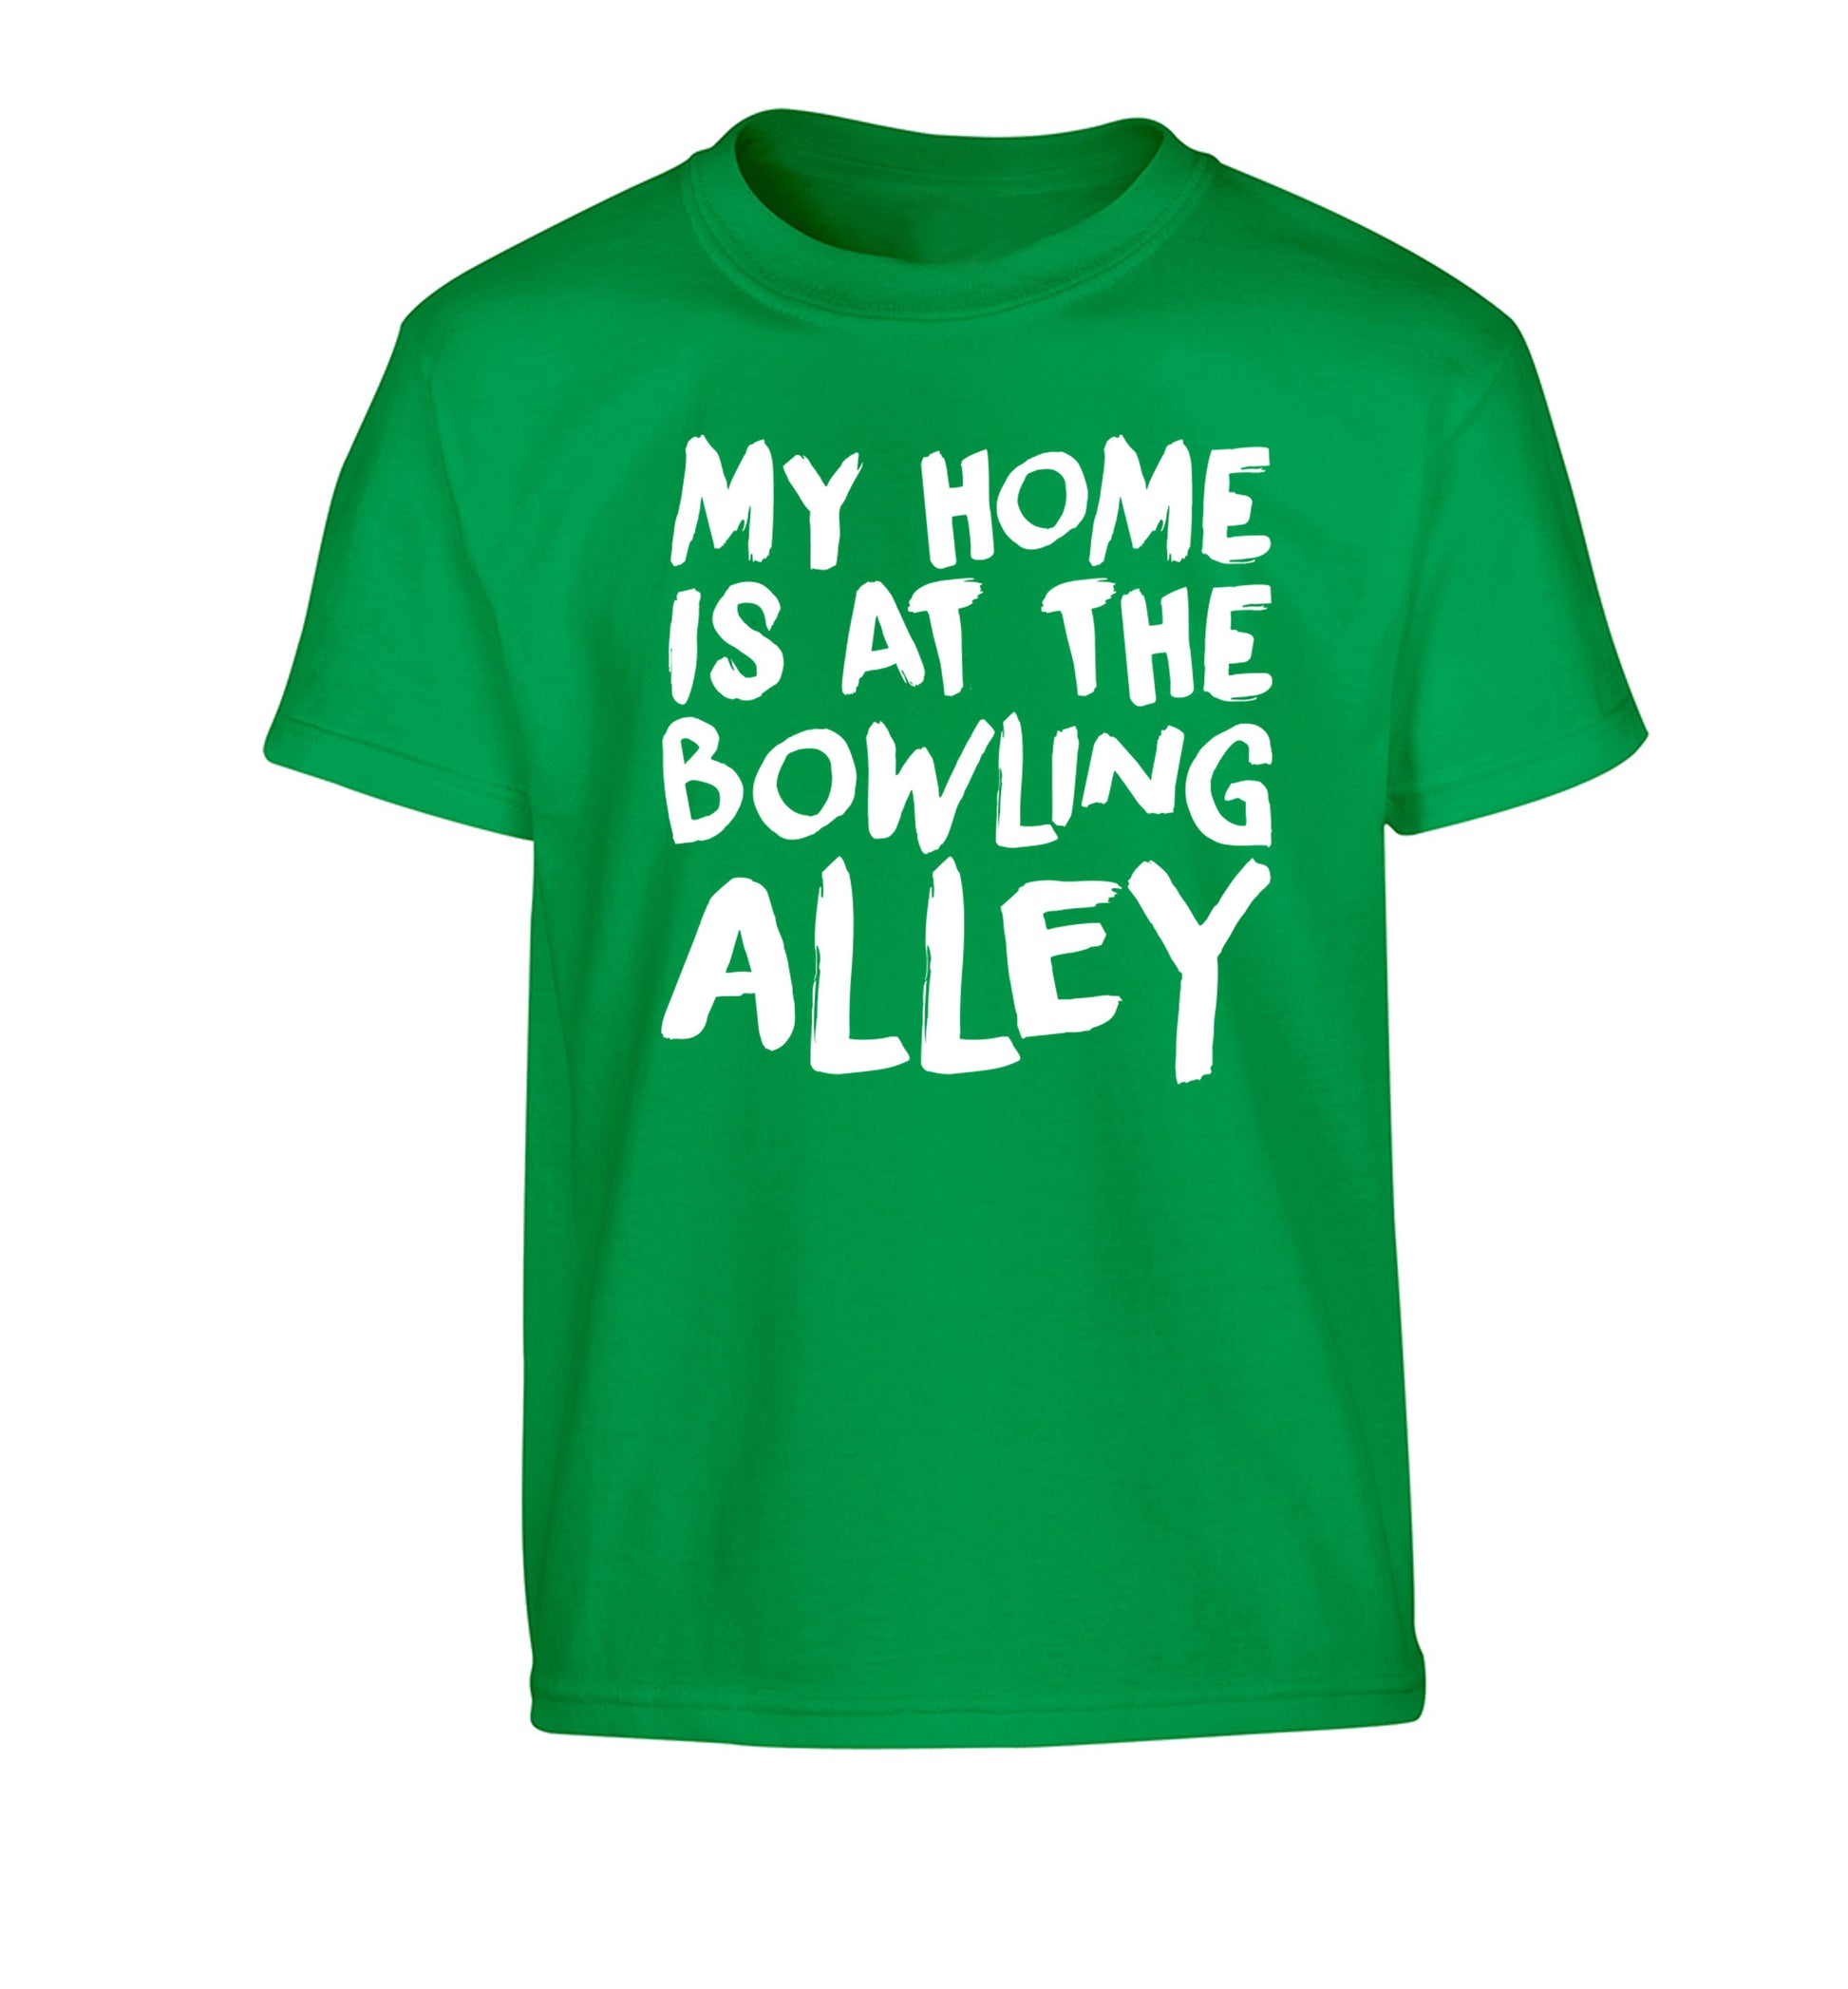 My home is at the bowling alley Children's green Tshirt 12-14 Years